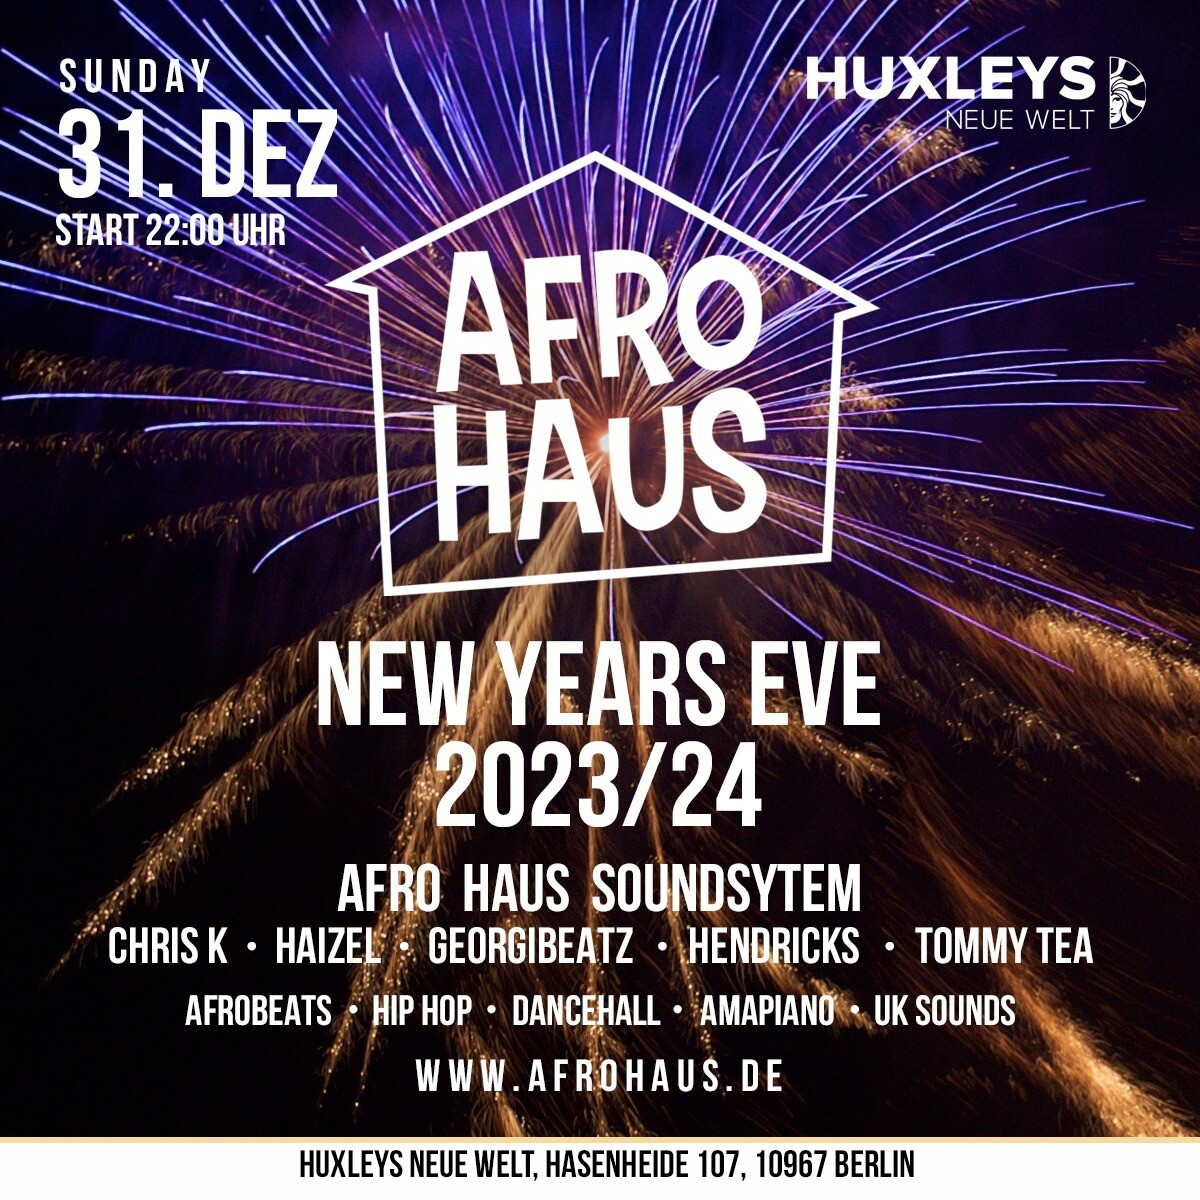 Huxley’s Neue Welt Berlin Afro Haus New Years Eve - Silvester Party 2023 / 2024